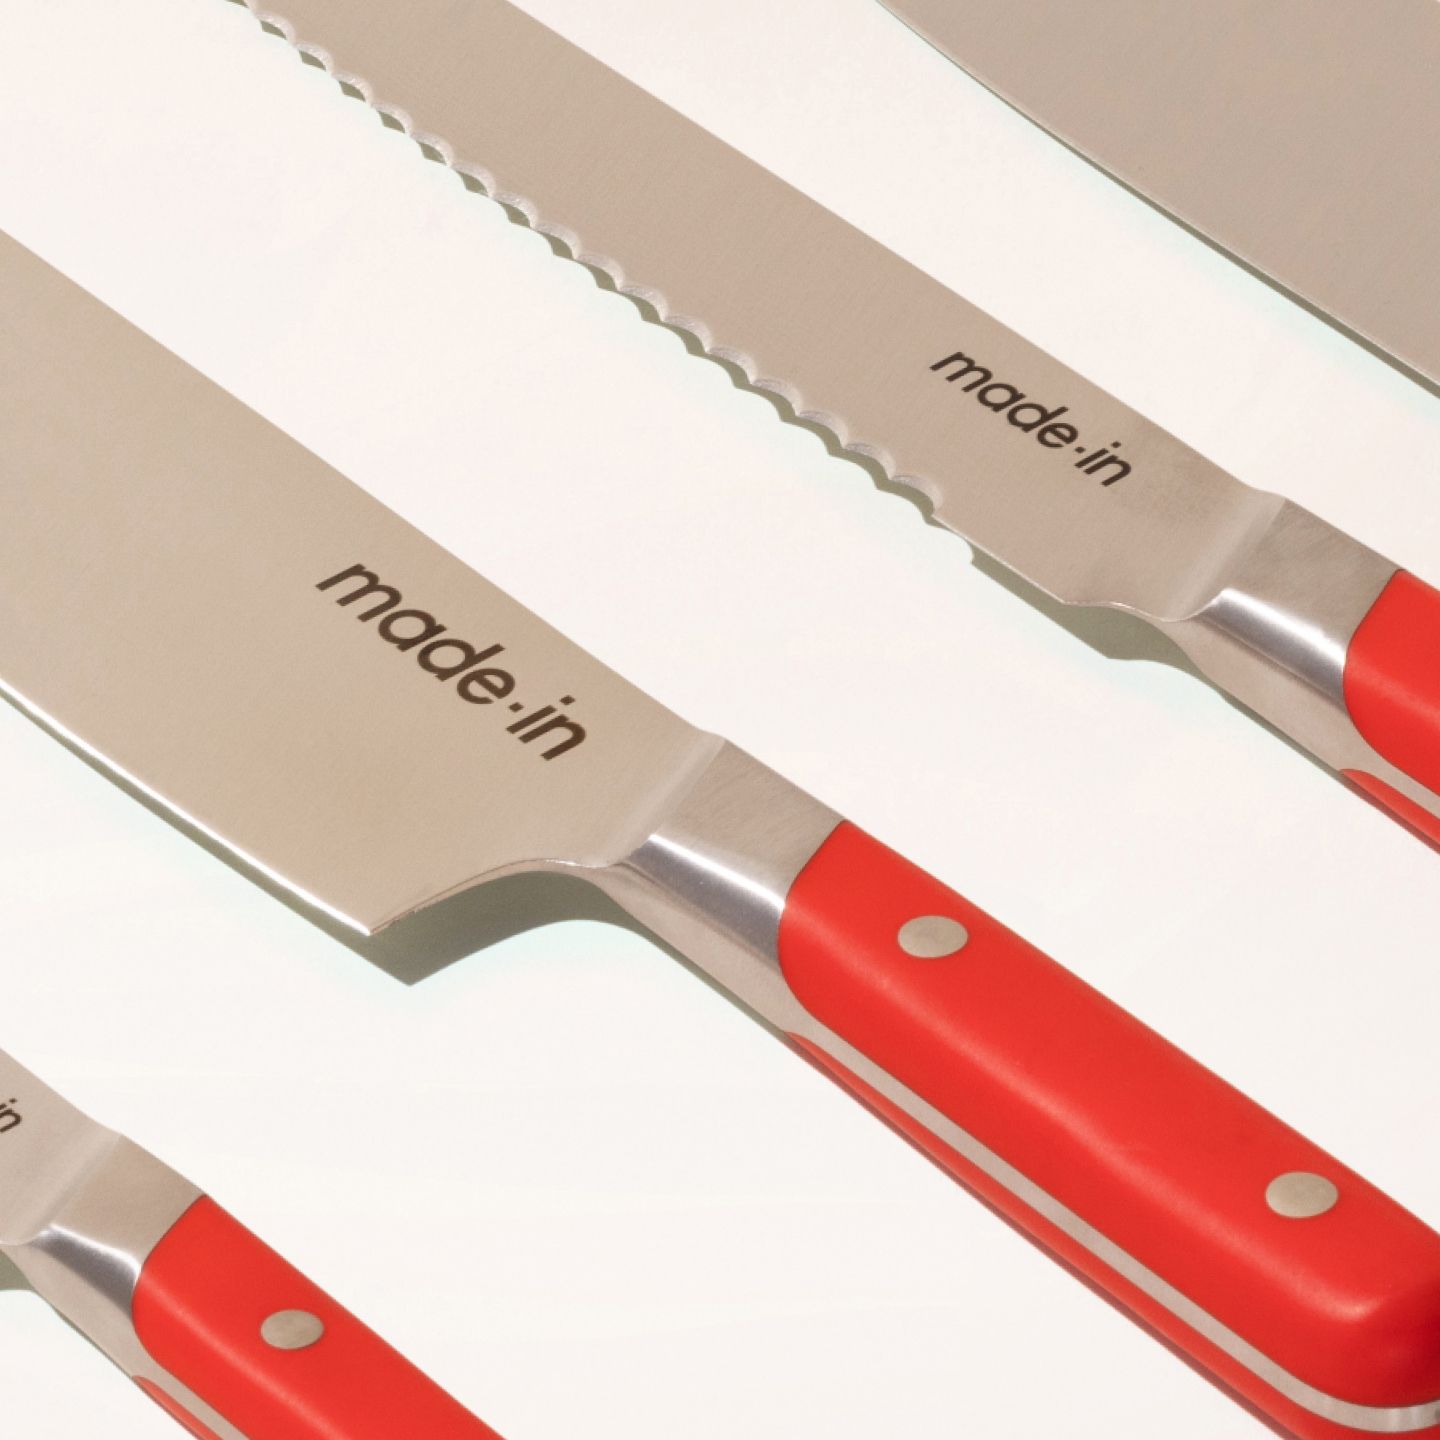  Made In Cookware - 8 Chef Knife France - Full Tang With Pomme  Red Handle: Home & Kitchen